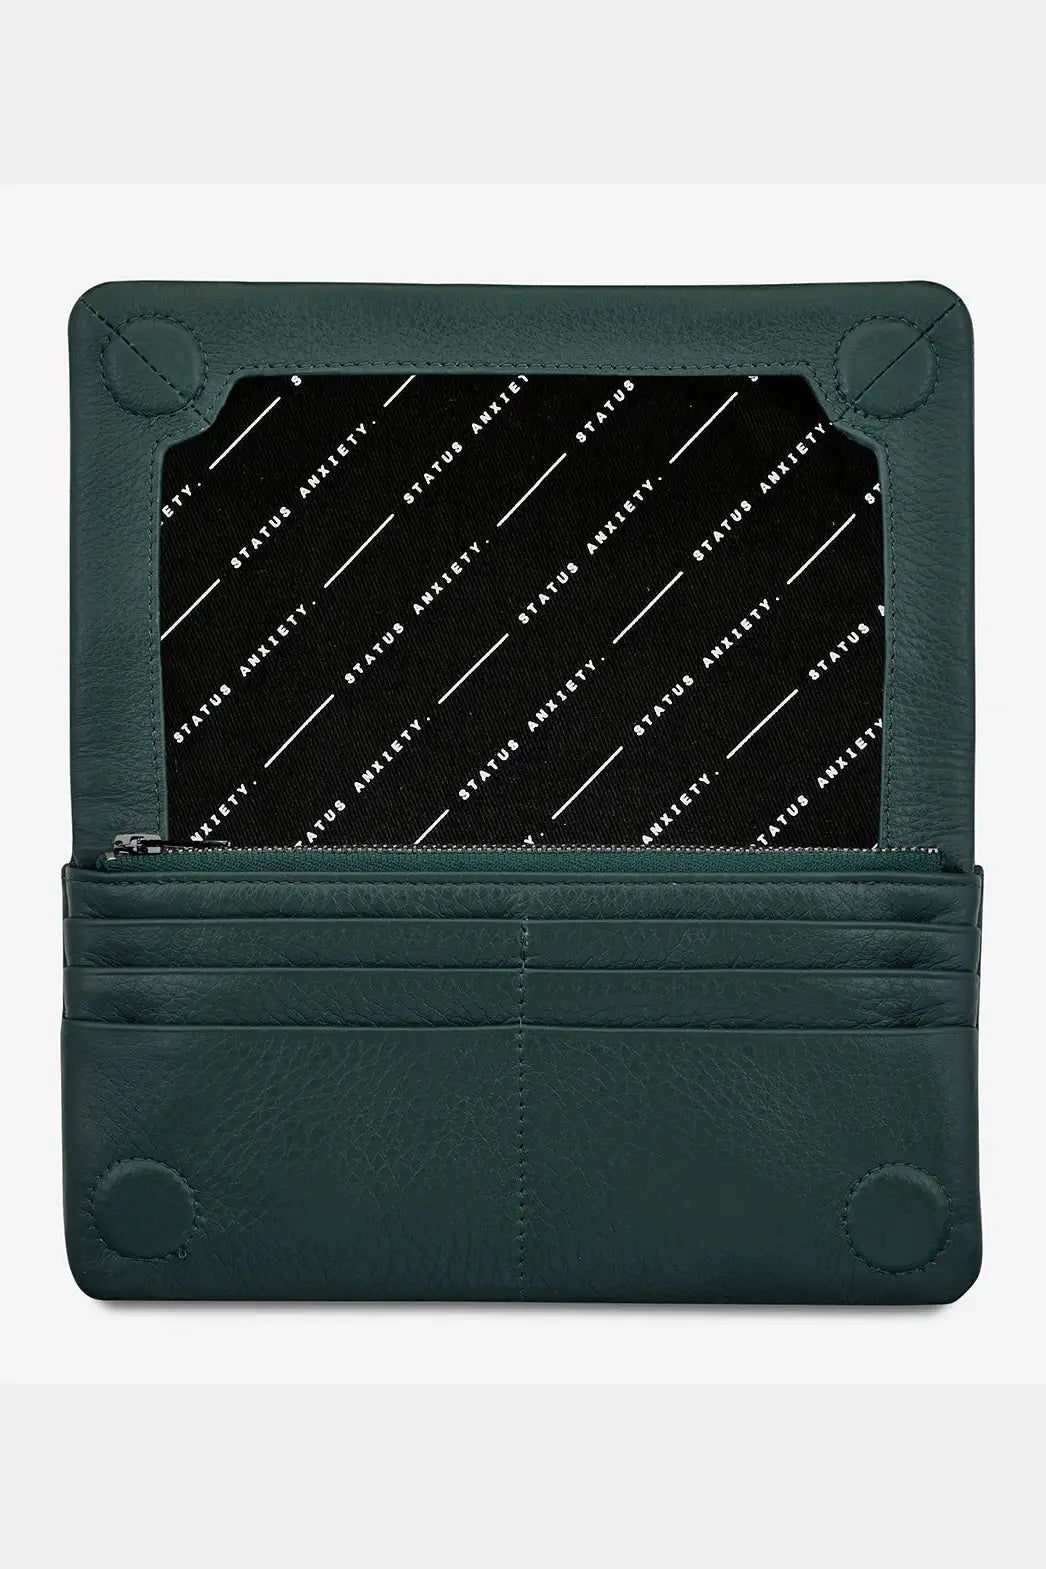 Status anxiety some type of love wallet - teal